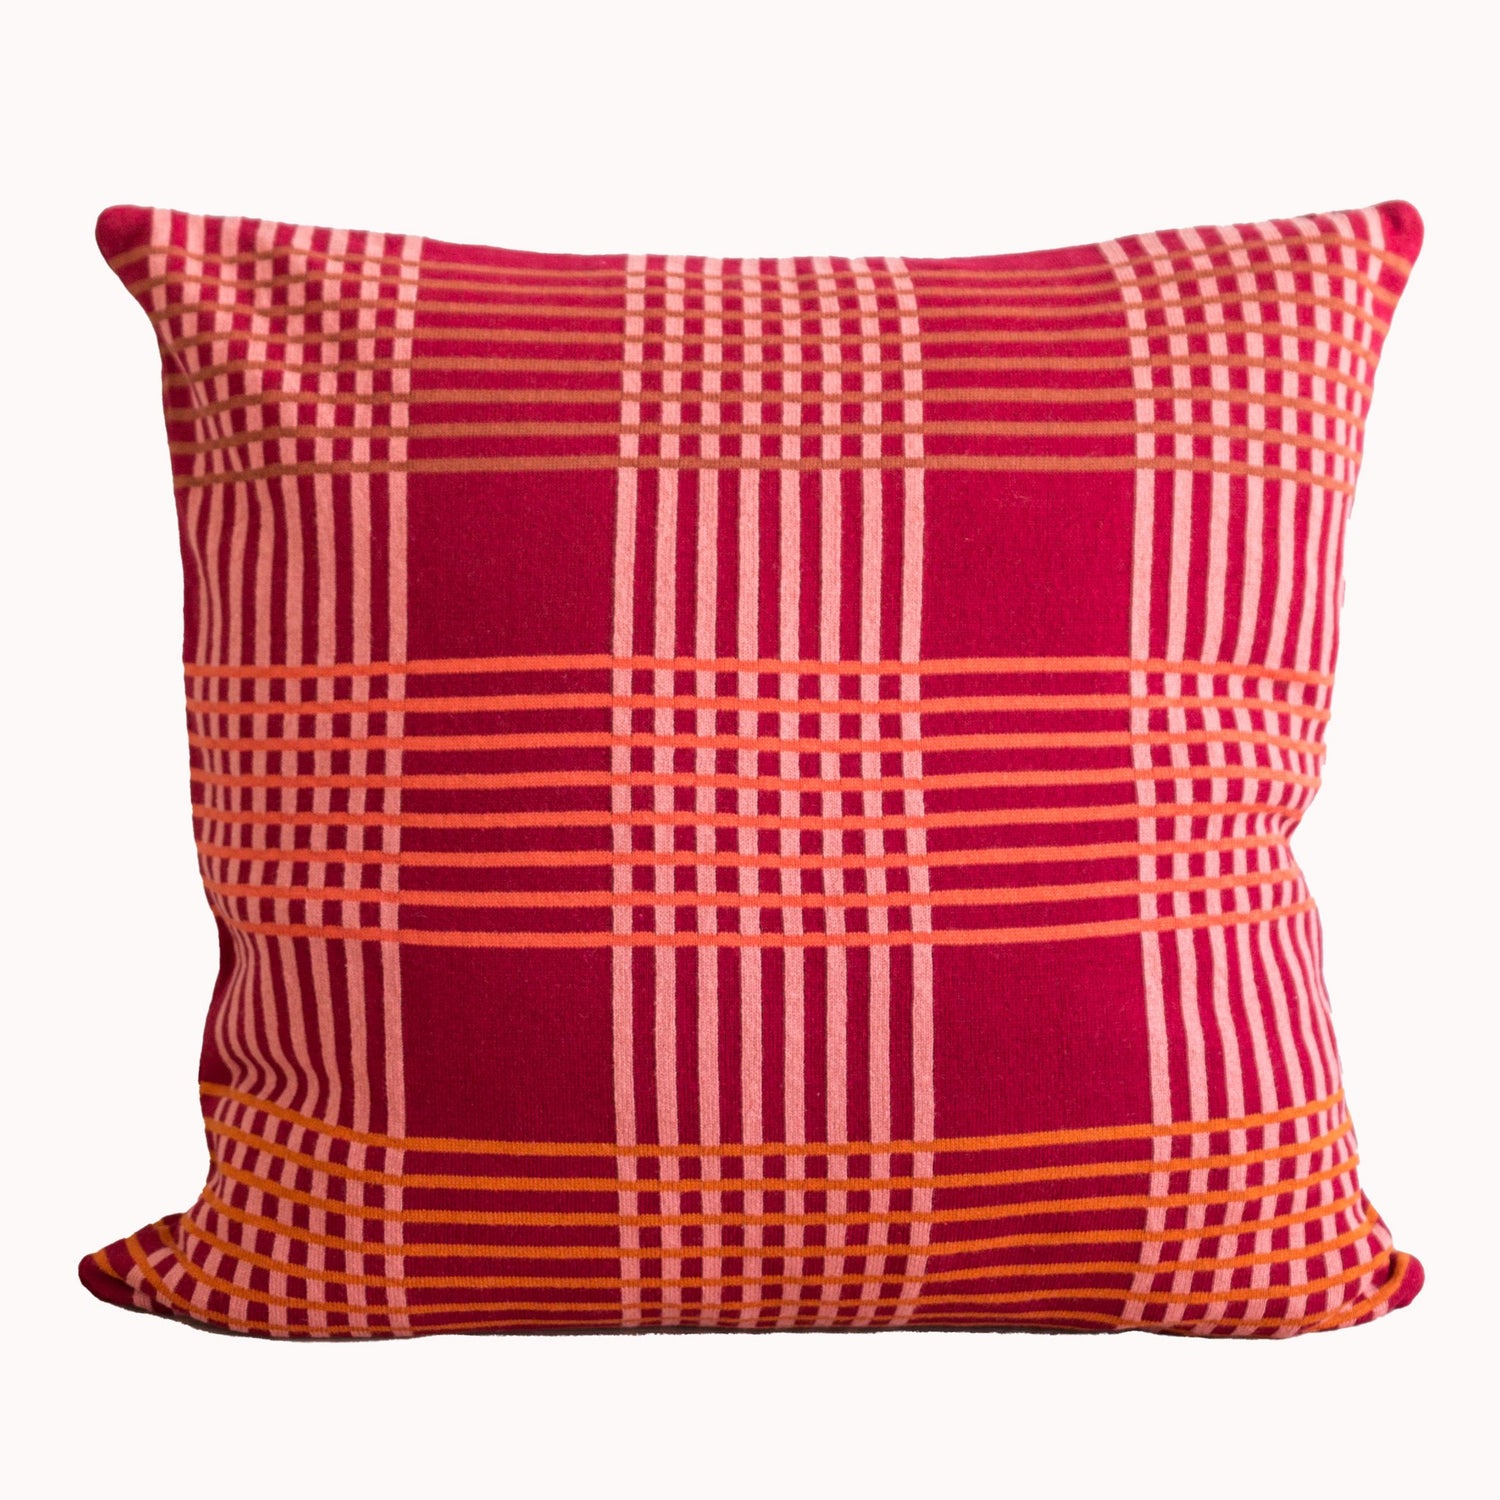 Ruth pillow-cover red, soft cotton knit